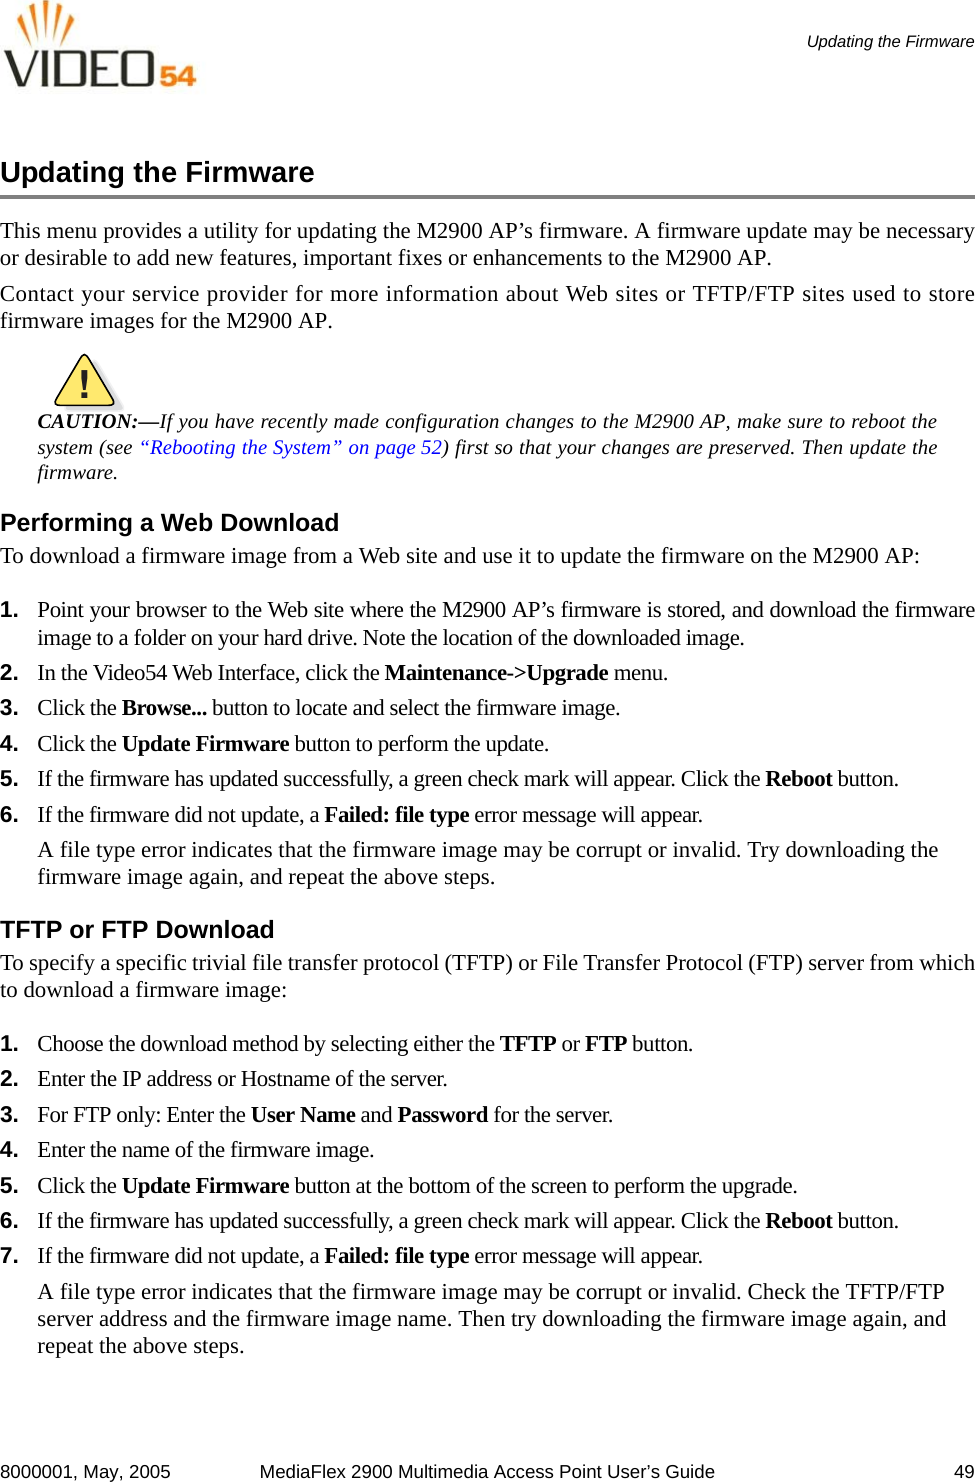 8000001, May, 2005 MediaFlex 2900 Multimedia Access Point User’s Guide 49Updating the FirmwareUpdating the FirmwareThis menu provides a utility for updating the M2900 AP’s firmware. A firmware update may be necessaryor desirable to add new features, important fixes or enhancements to the M2900 AP.Contact your service provider for more information about Web sites or TFTP/FTP sites used to storefirmware images for the M2900 AP.!CAUTION:—If you have recently made configuration changes to the M2900 AP, make sure to reboot thesystem (see “Rebooting the System” on page 52) first so that your changes are preserved. Then update thefirmware.Performing a Web DownloadTo download a firmware image from a Web site and use it to update the firmware on the M2900 AP:1. Point your browser to the Web site where the M2900 AP’s firmware is stored, and download the firmwareimage to a folder on your hard drive. Note the location of the downloaded image.2. In the Video54 Web Interface, click the Maintenance-&gt;Upgrade menu.3. Click the Browse... button to locate and select the firmware image. 4. Click the Update Firmware button to perform the update.5. If the firmware has updated successfully, a green check mark will appear. Click the Reboot button.6. If the firmware did not update, a Failed: file type error message will appear. A file type error indicates that the firmware image may be corrupt or invalid. Try downloading the firmware image again, and repeat the above steps.TFTP or FTP DownloadTo specify a specific trivial file transfer protocol (TFTP) or File Transfer Protocol (FTP) server from whichto download a firmware image:1. Choose the download method by selecting either the TFTP or FTP button.2. Enter the IP address or Hostname of the server.3. For FTP only: Enter the User Name and Password for the server.4. Enter the name of the firmware image.5. Click the Update Firmware button at the bottom of the screen to perform the upgrade. 6. If the firmware has updated successfully, a green check mark will appear. Click the Reboot button.7. If the firmware did not update, a Failed: file type error message will appear. A file type error indicates that the firmware image may be corrupt or invalid. Check the TFTP/FTP server address and the firmware image name. Then try downloading the firmware image again, and repeat the above steps.